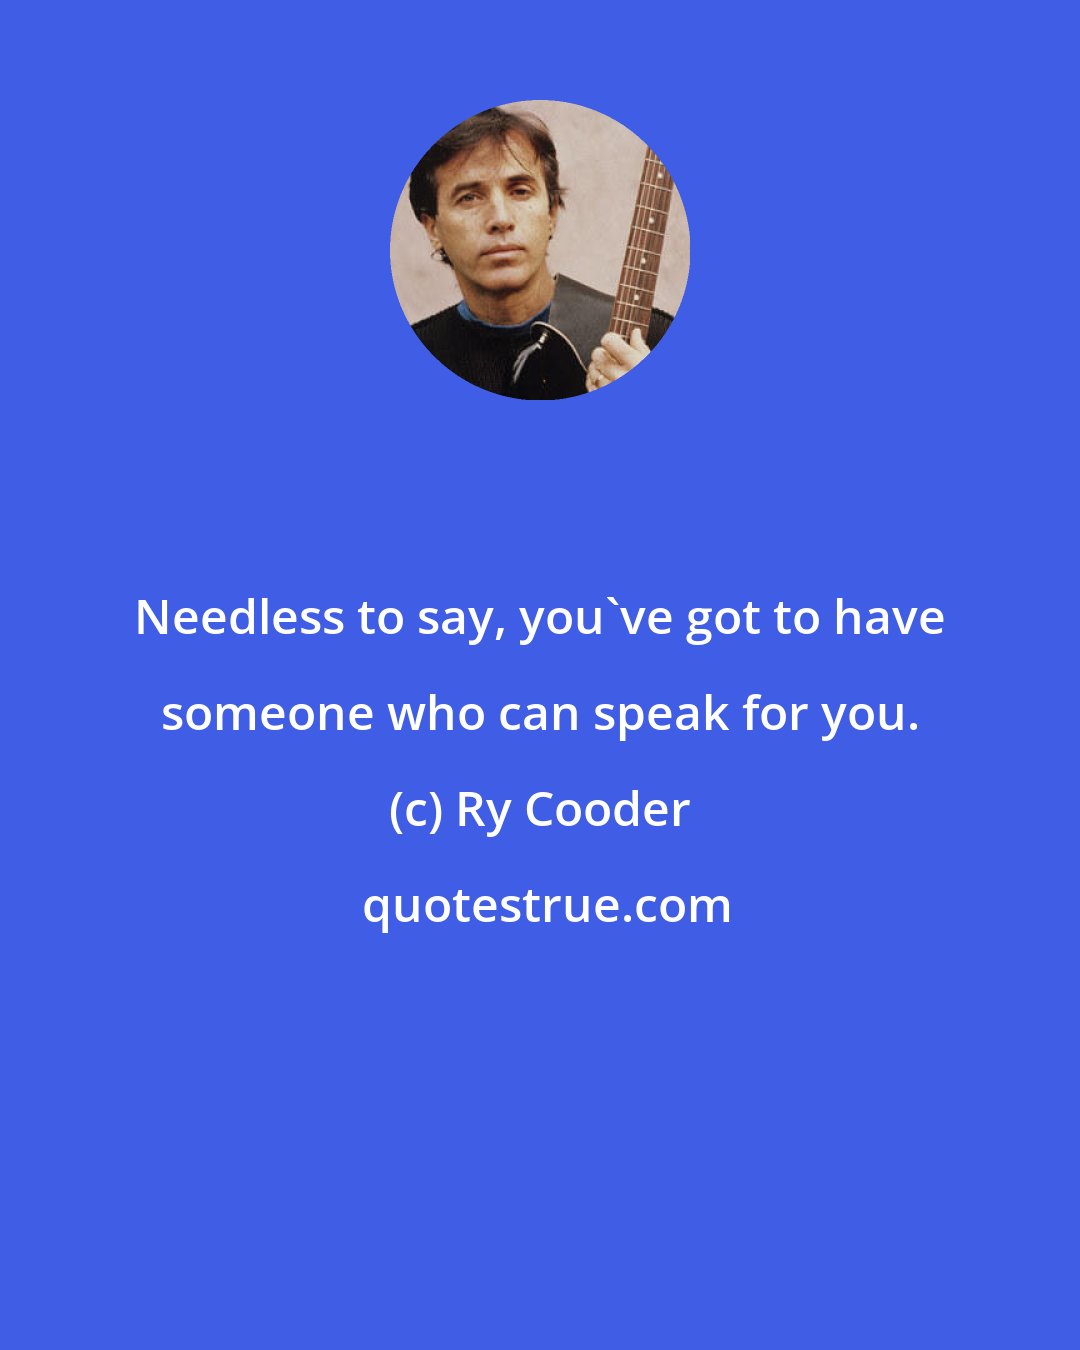 Ry Cooder: Needless to say, you've got to have someone who can speak for you.